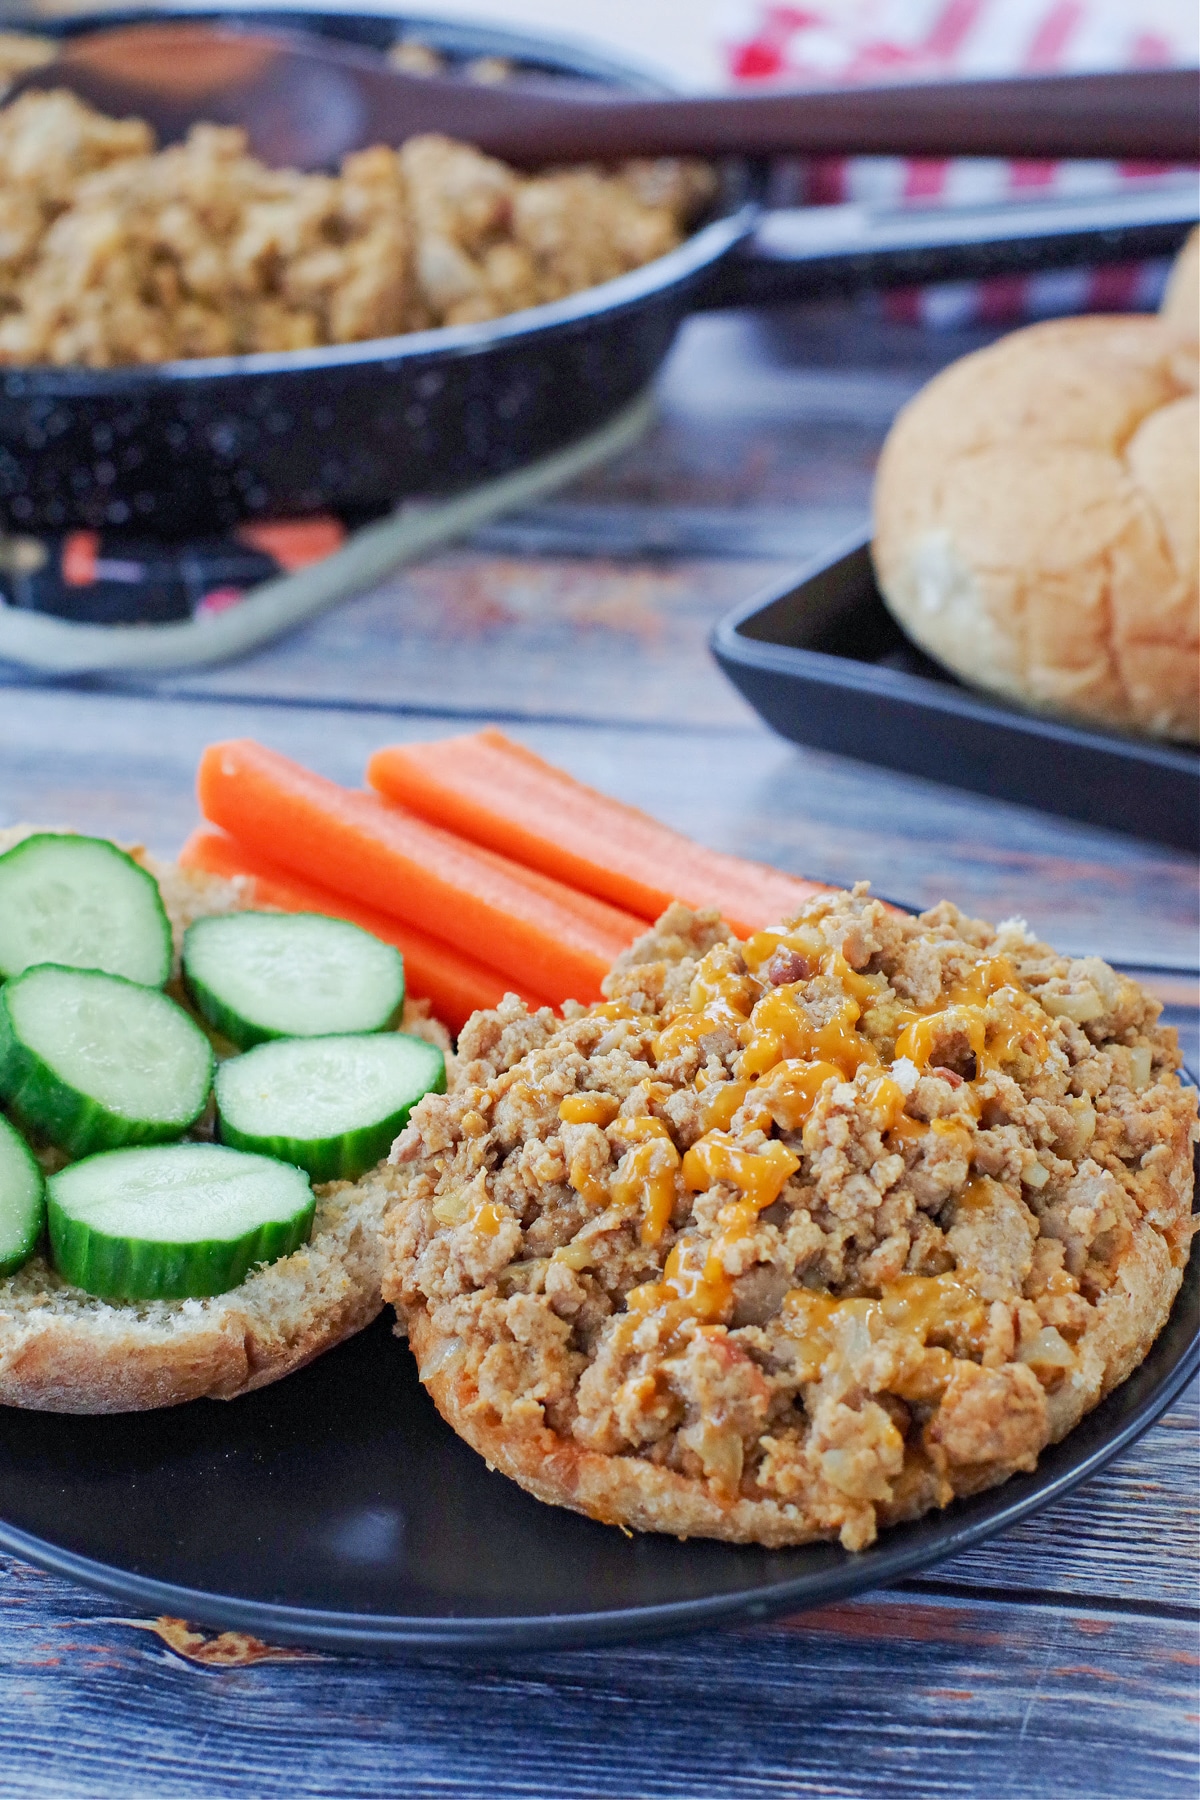 weight watchers turkey sloppy joes on a black plate with veggies and a skillet of more in the background